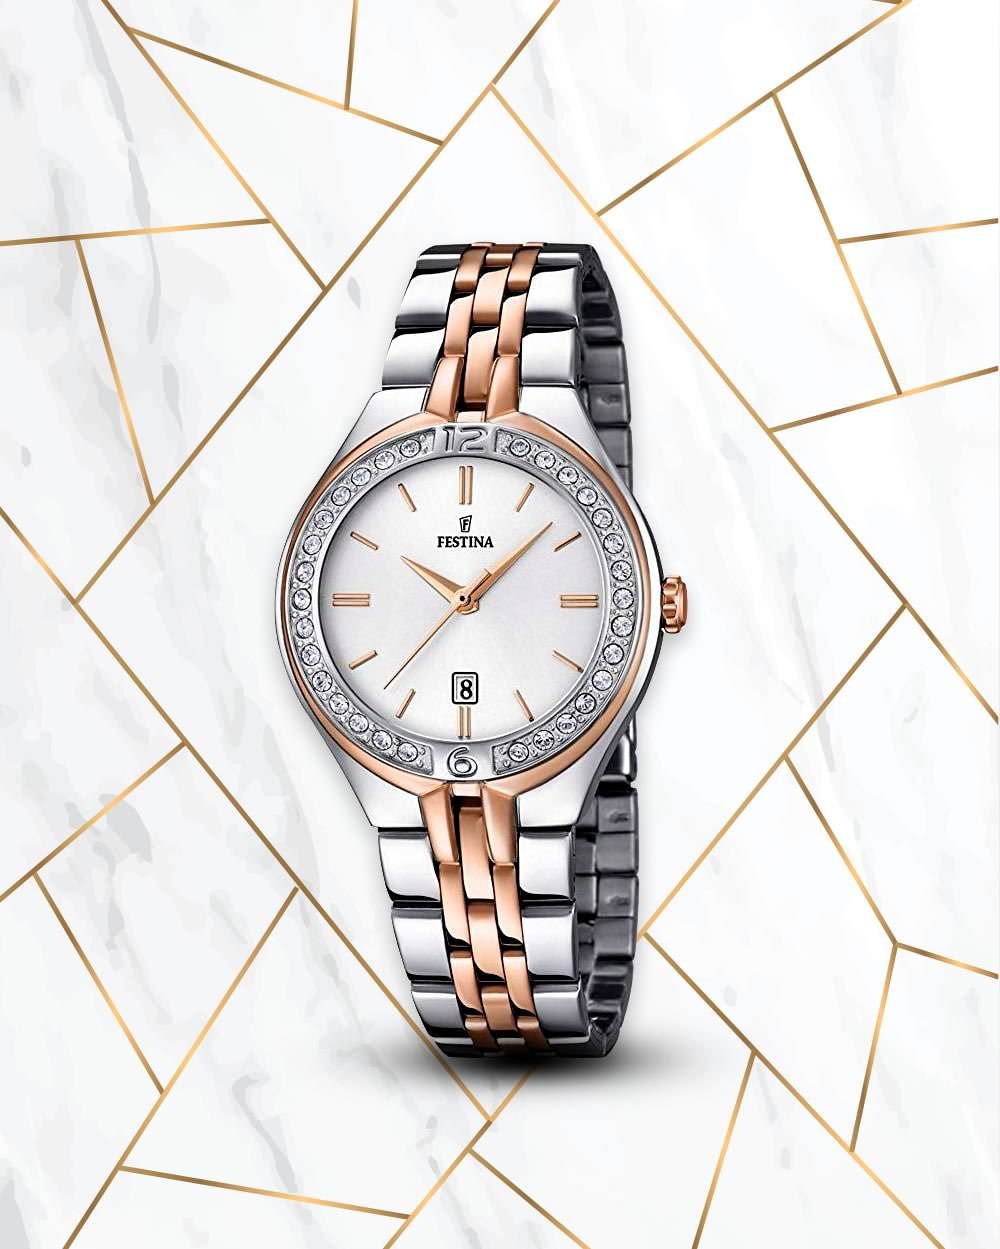 Ten Gorgeous Festina Watches for All Occasions - The Watch Guide